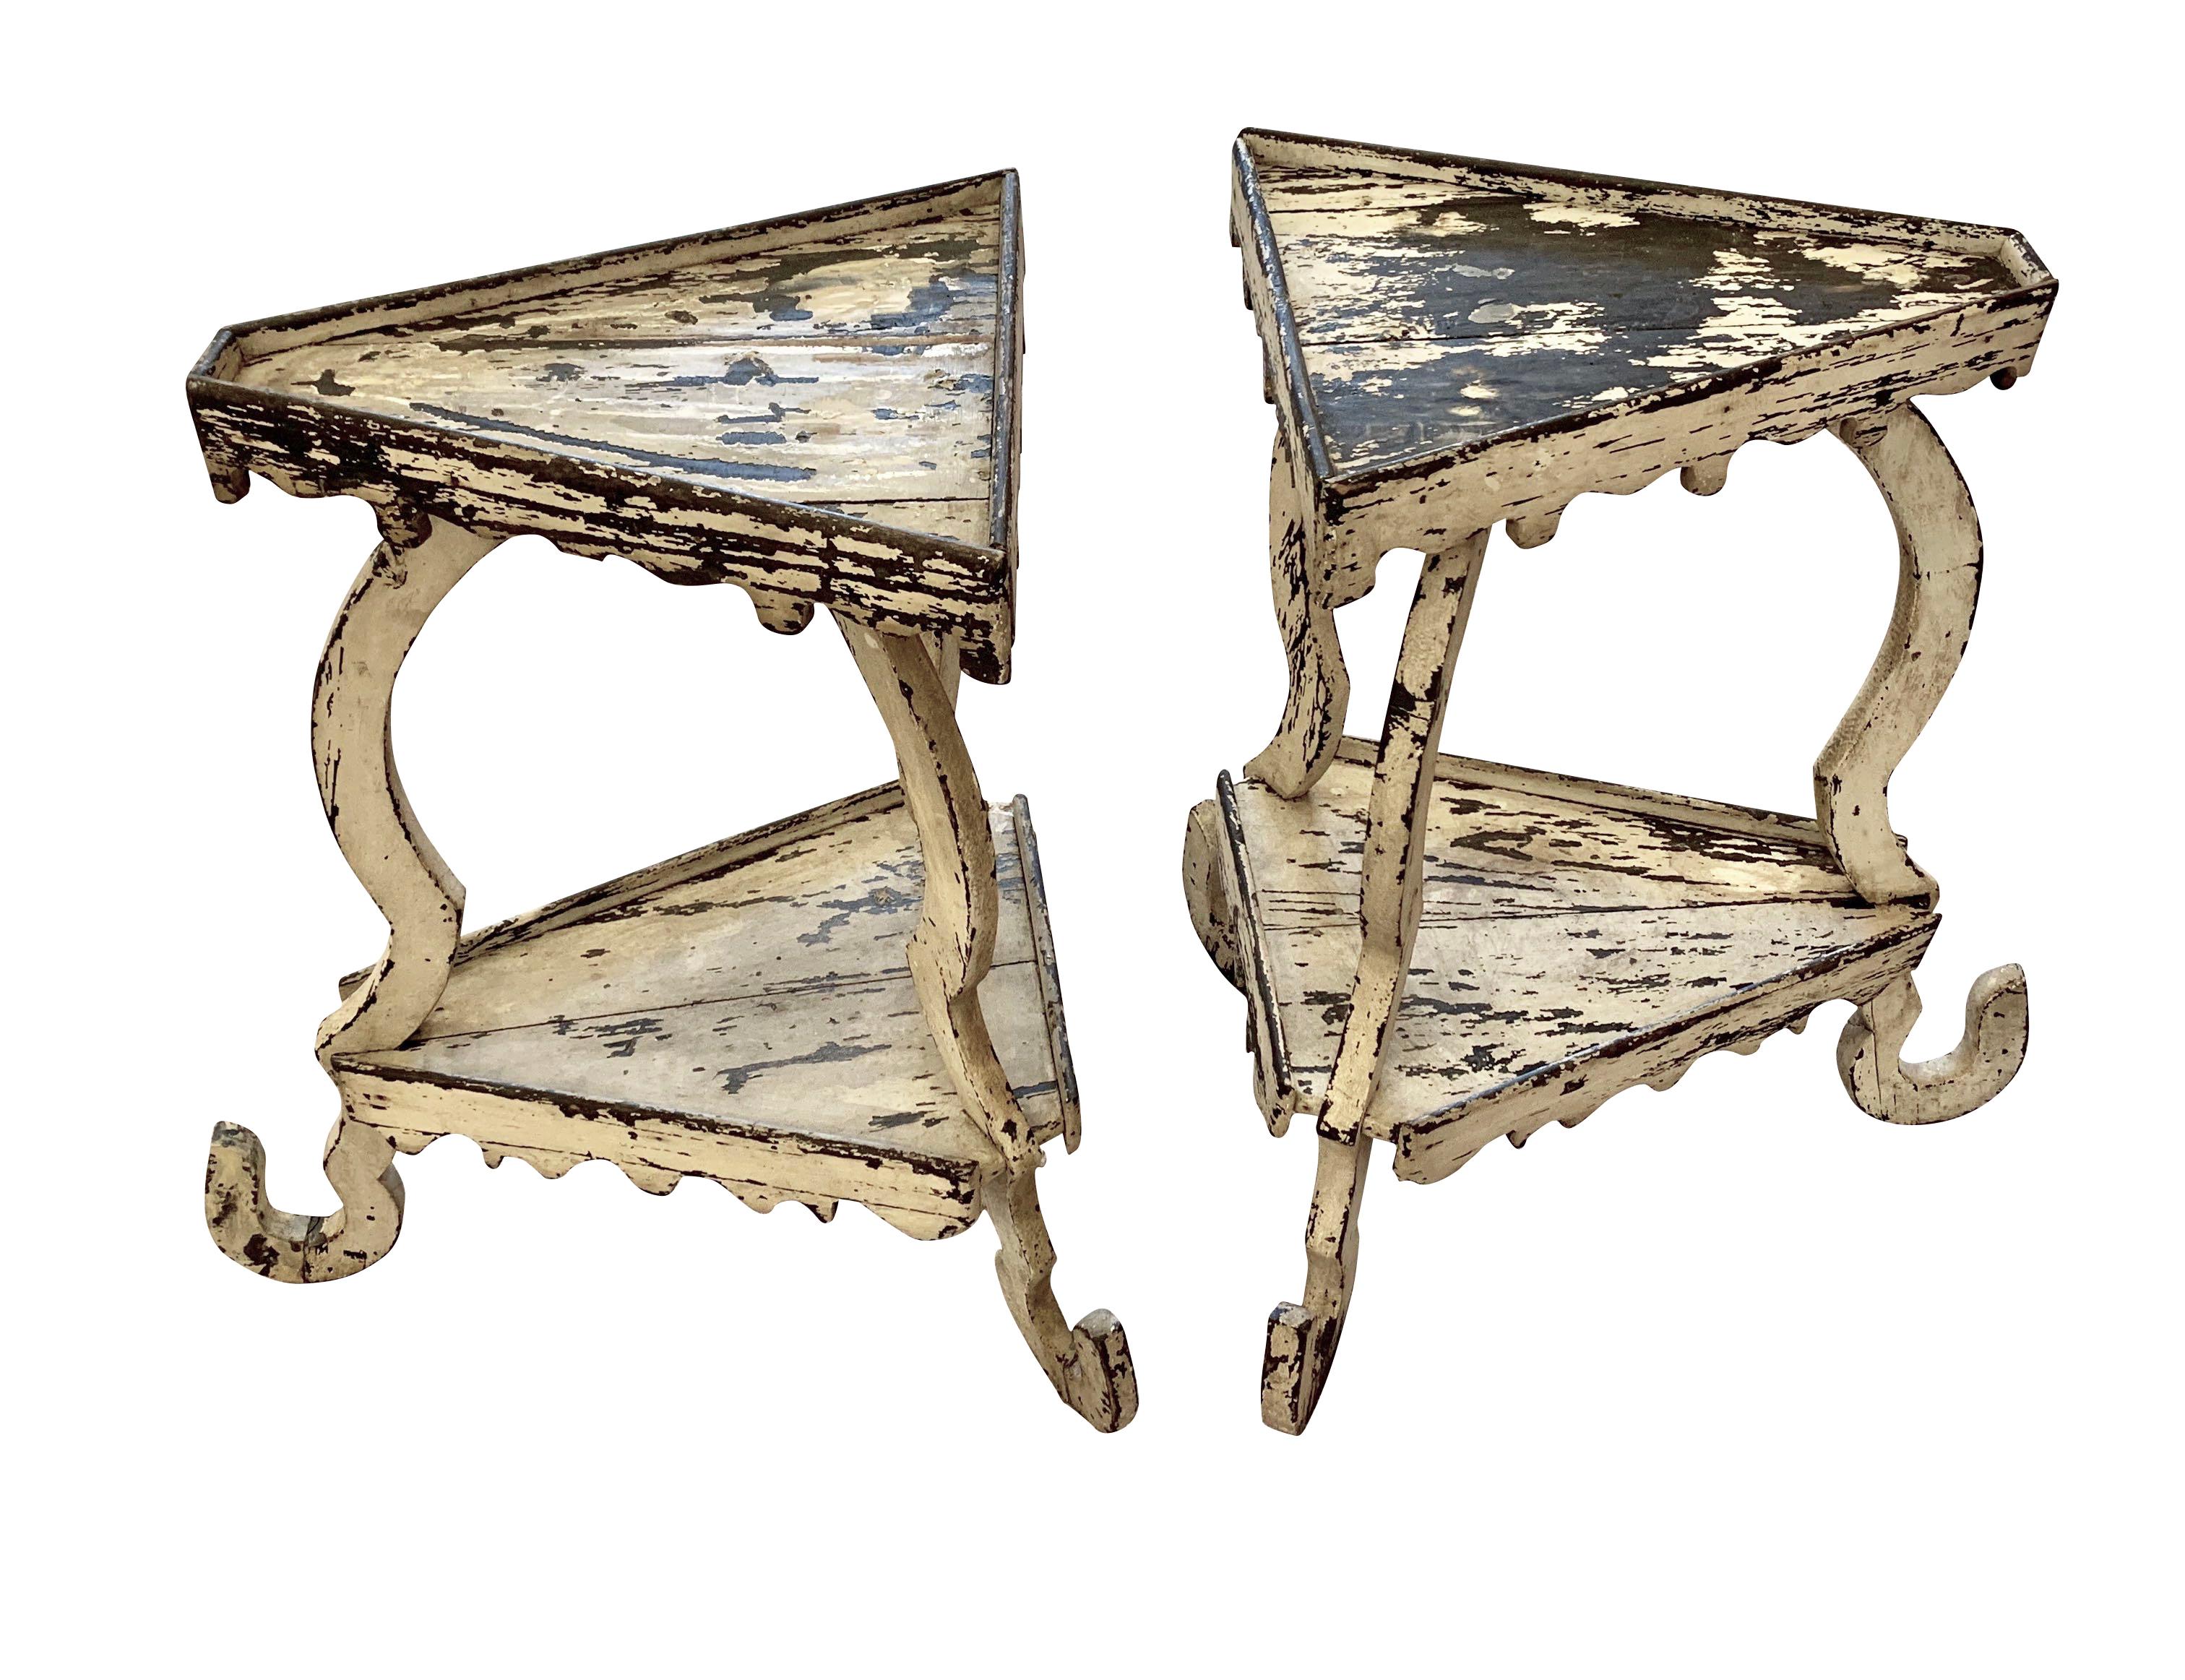 19th century pair of whimsical wood plant stands
Two tiers
Beautiful original weathered patina.